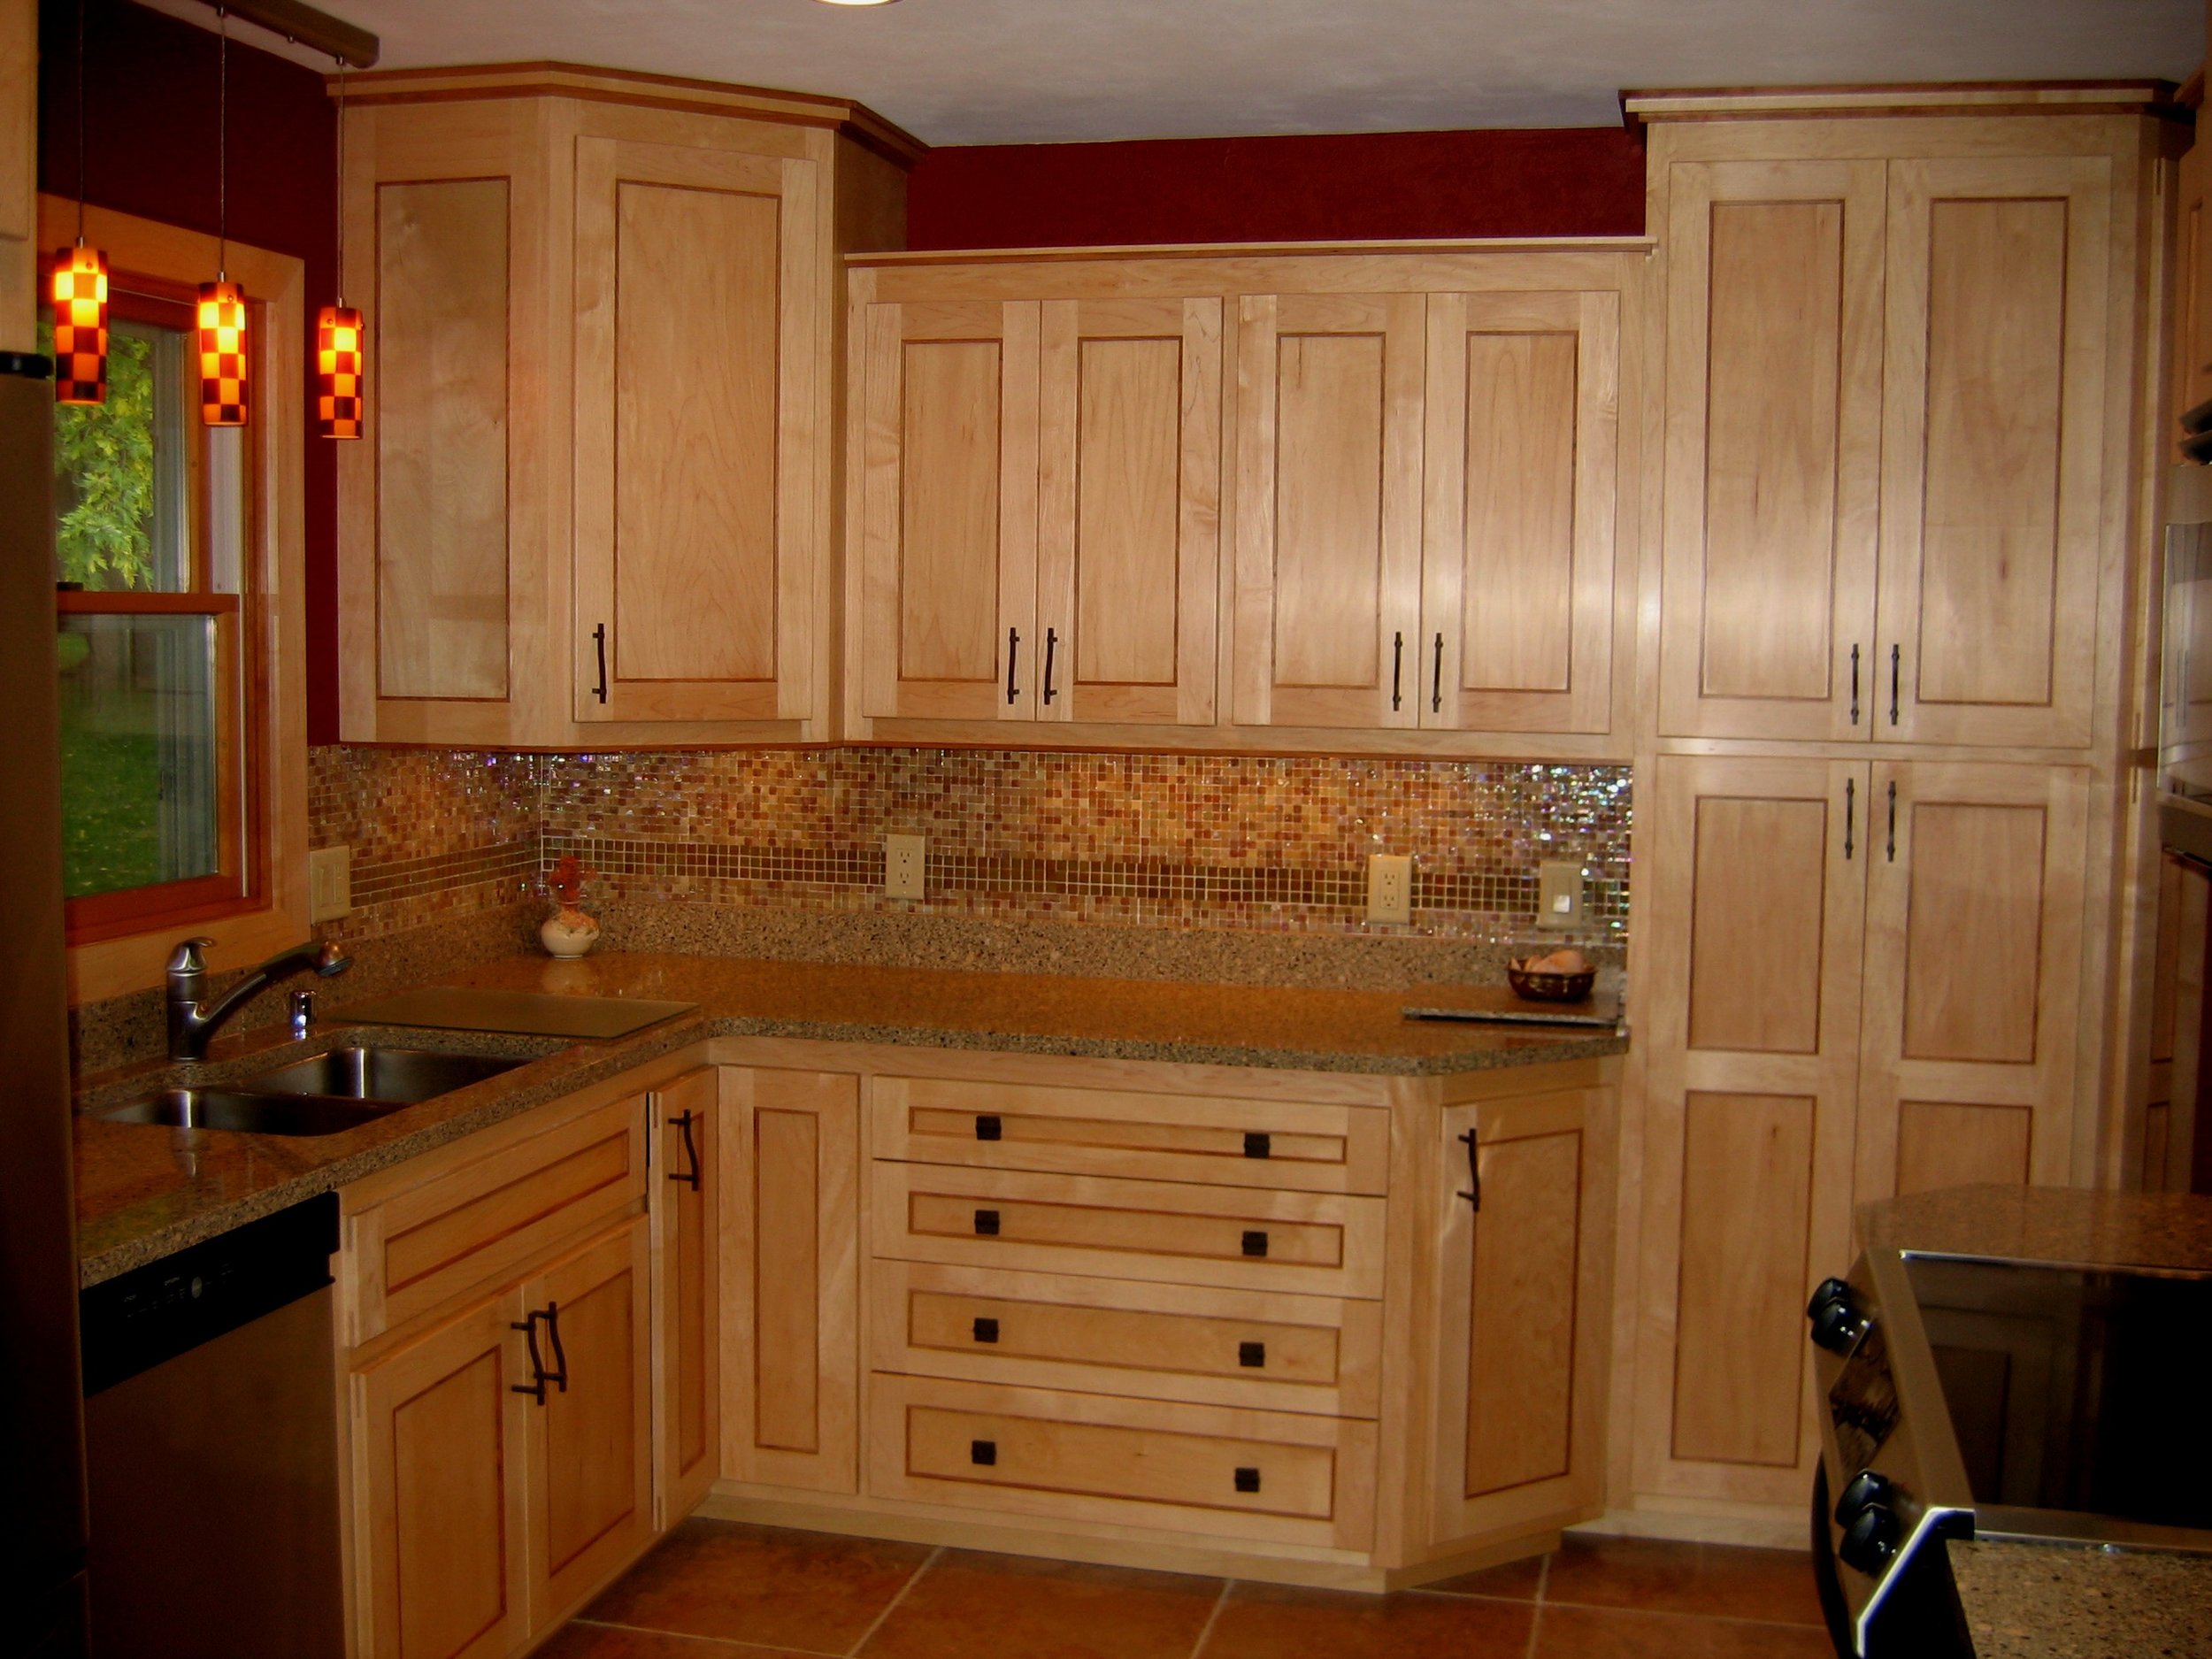 Maple Cabinets with Cherry Accents